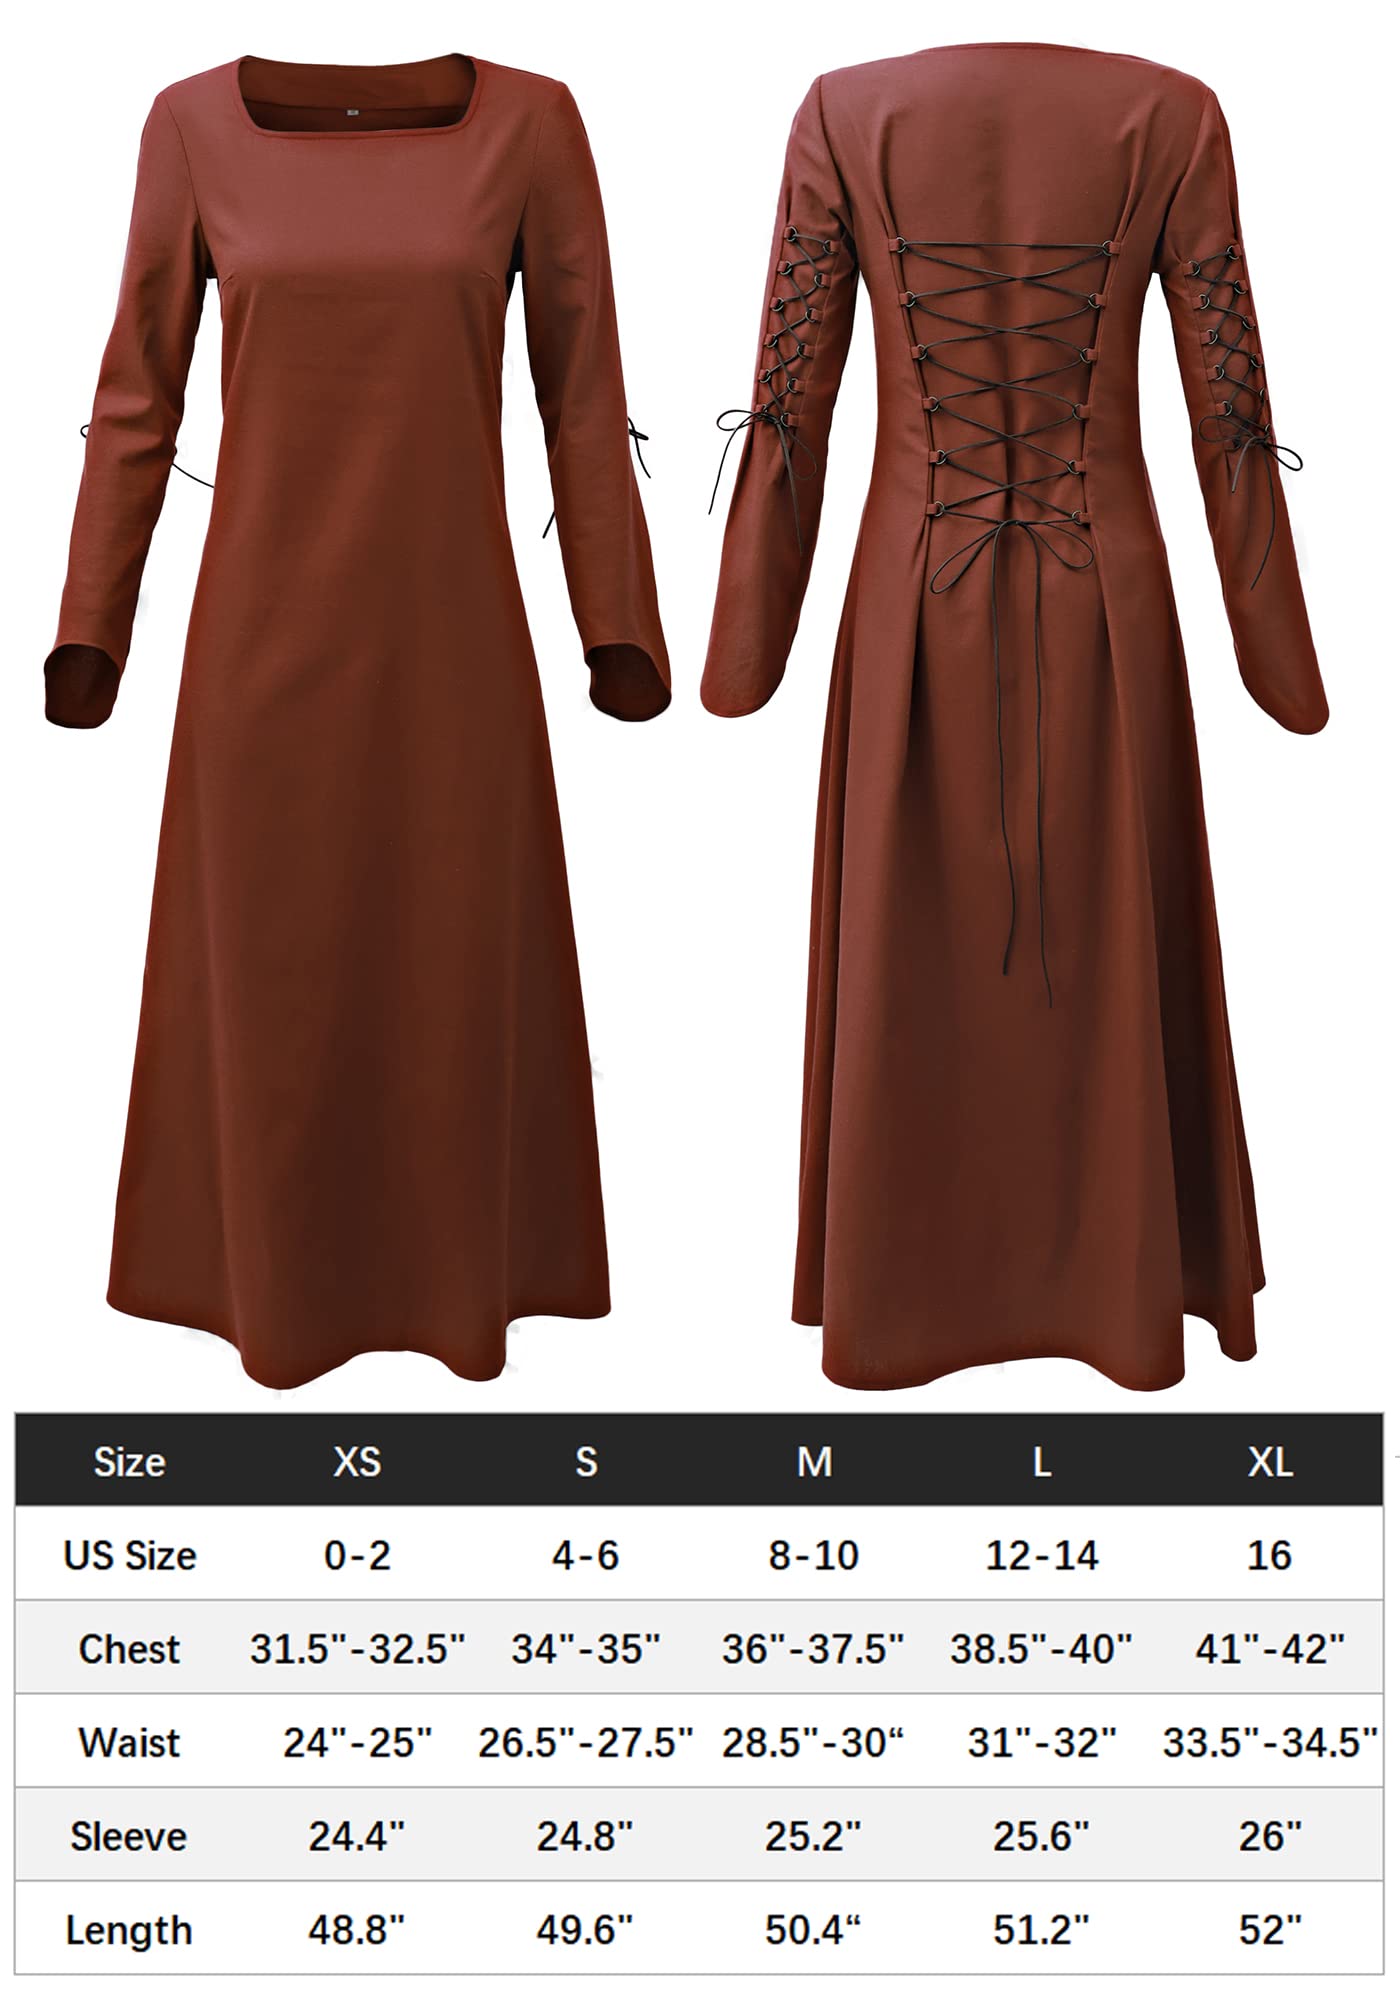 Wine Medieval Linen Dress for Women with Lace Up Costume